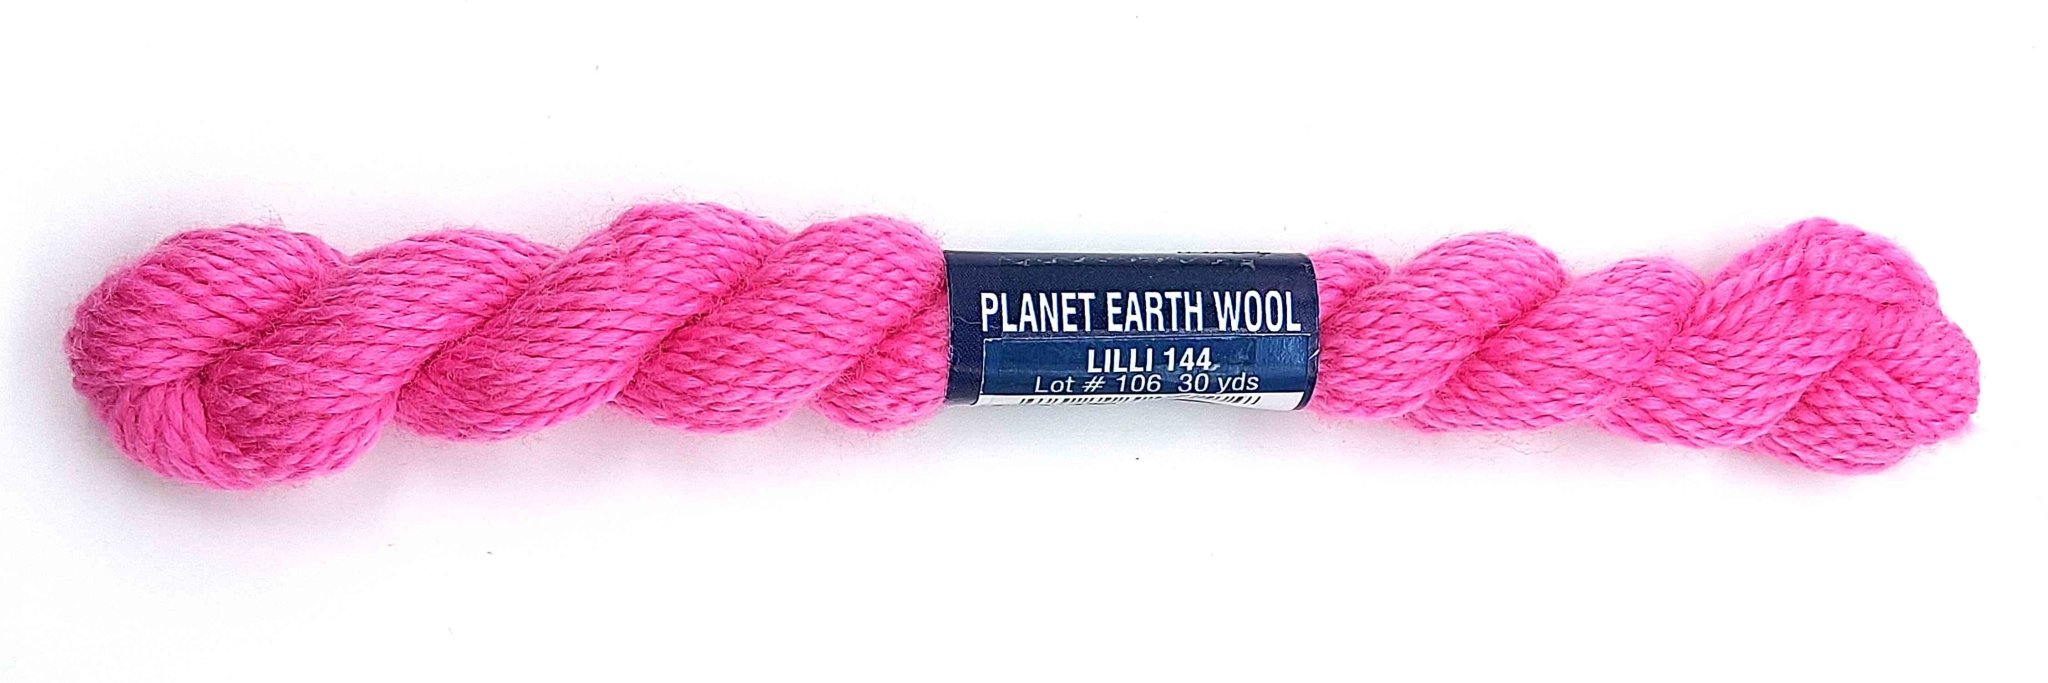 Planet Earth Wool 144 Lilli - The Flying Needles